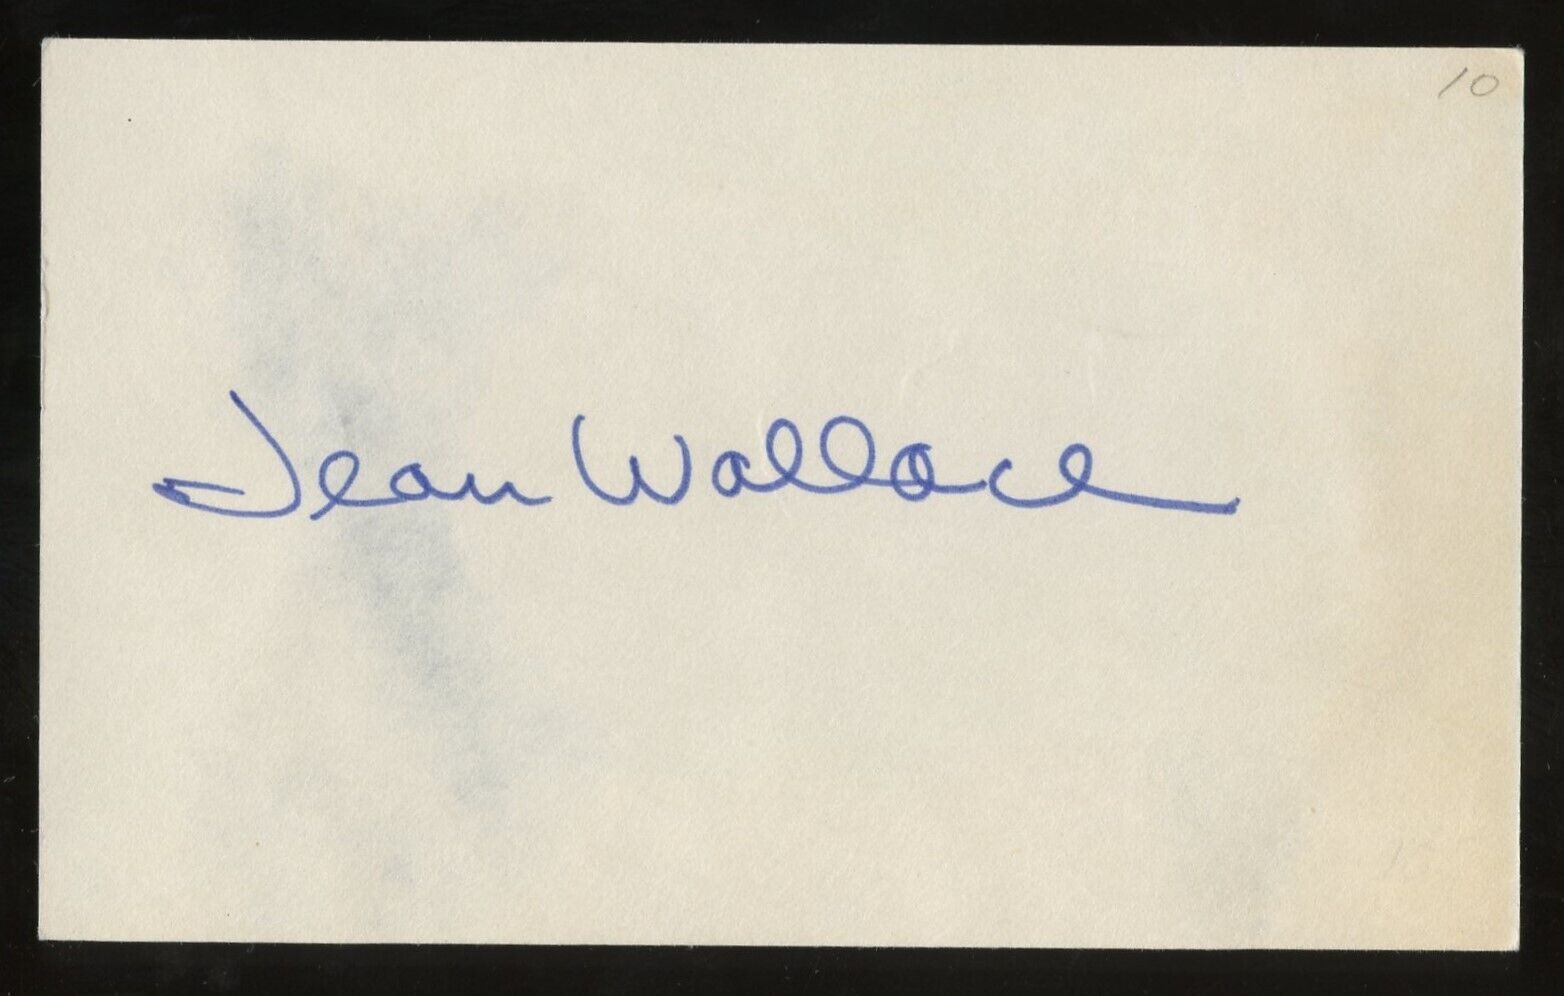 Jean Wallace d1990 signed autograph 3x5 Cut American Actress in The Big Combo